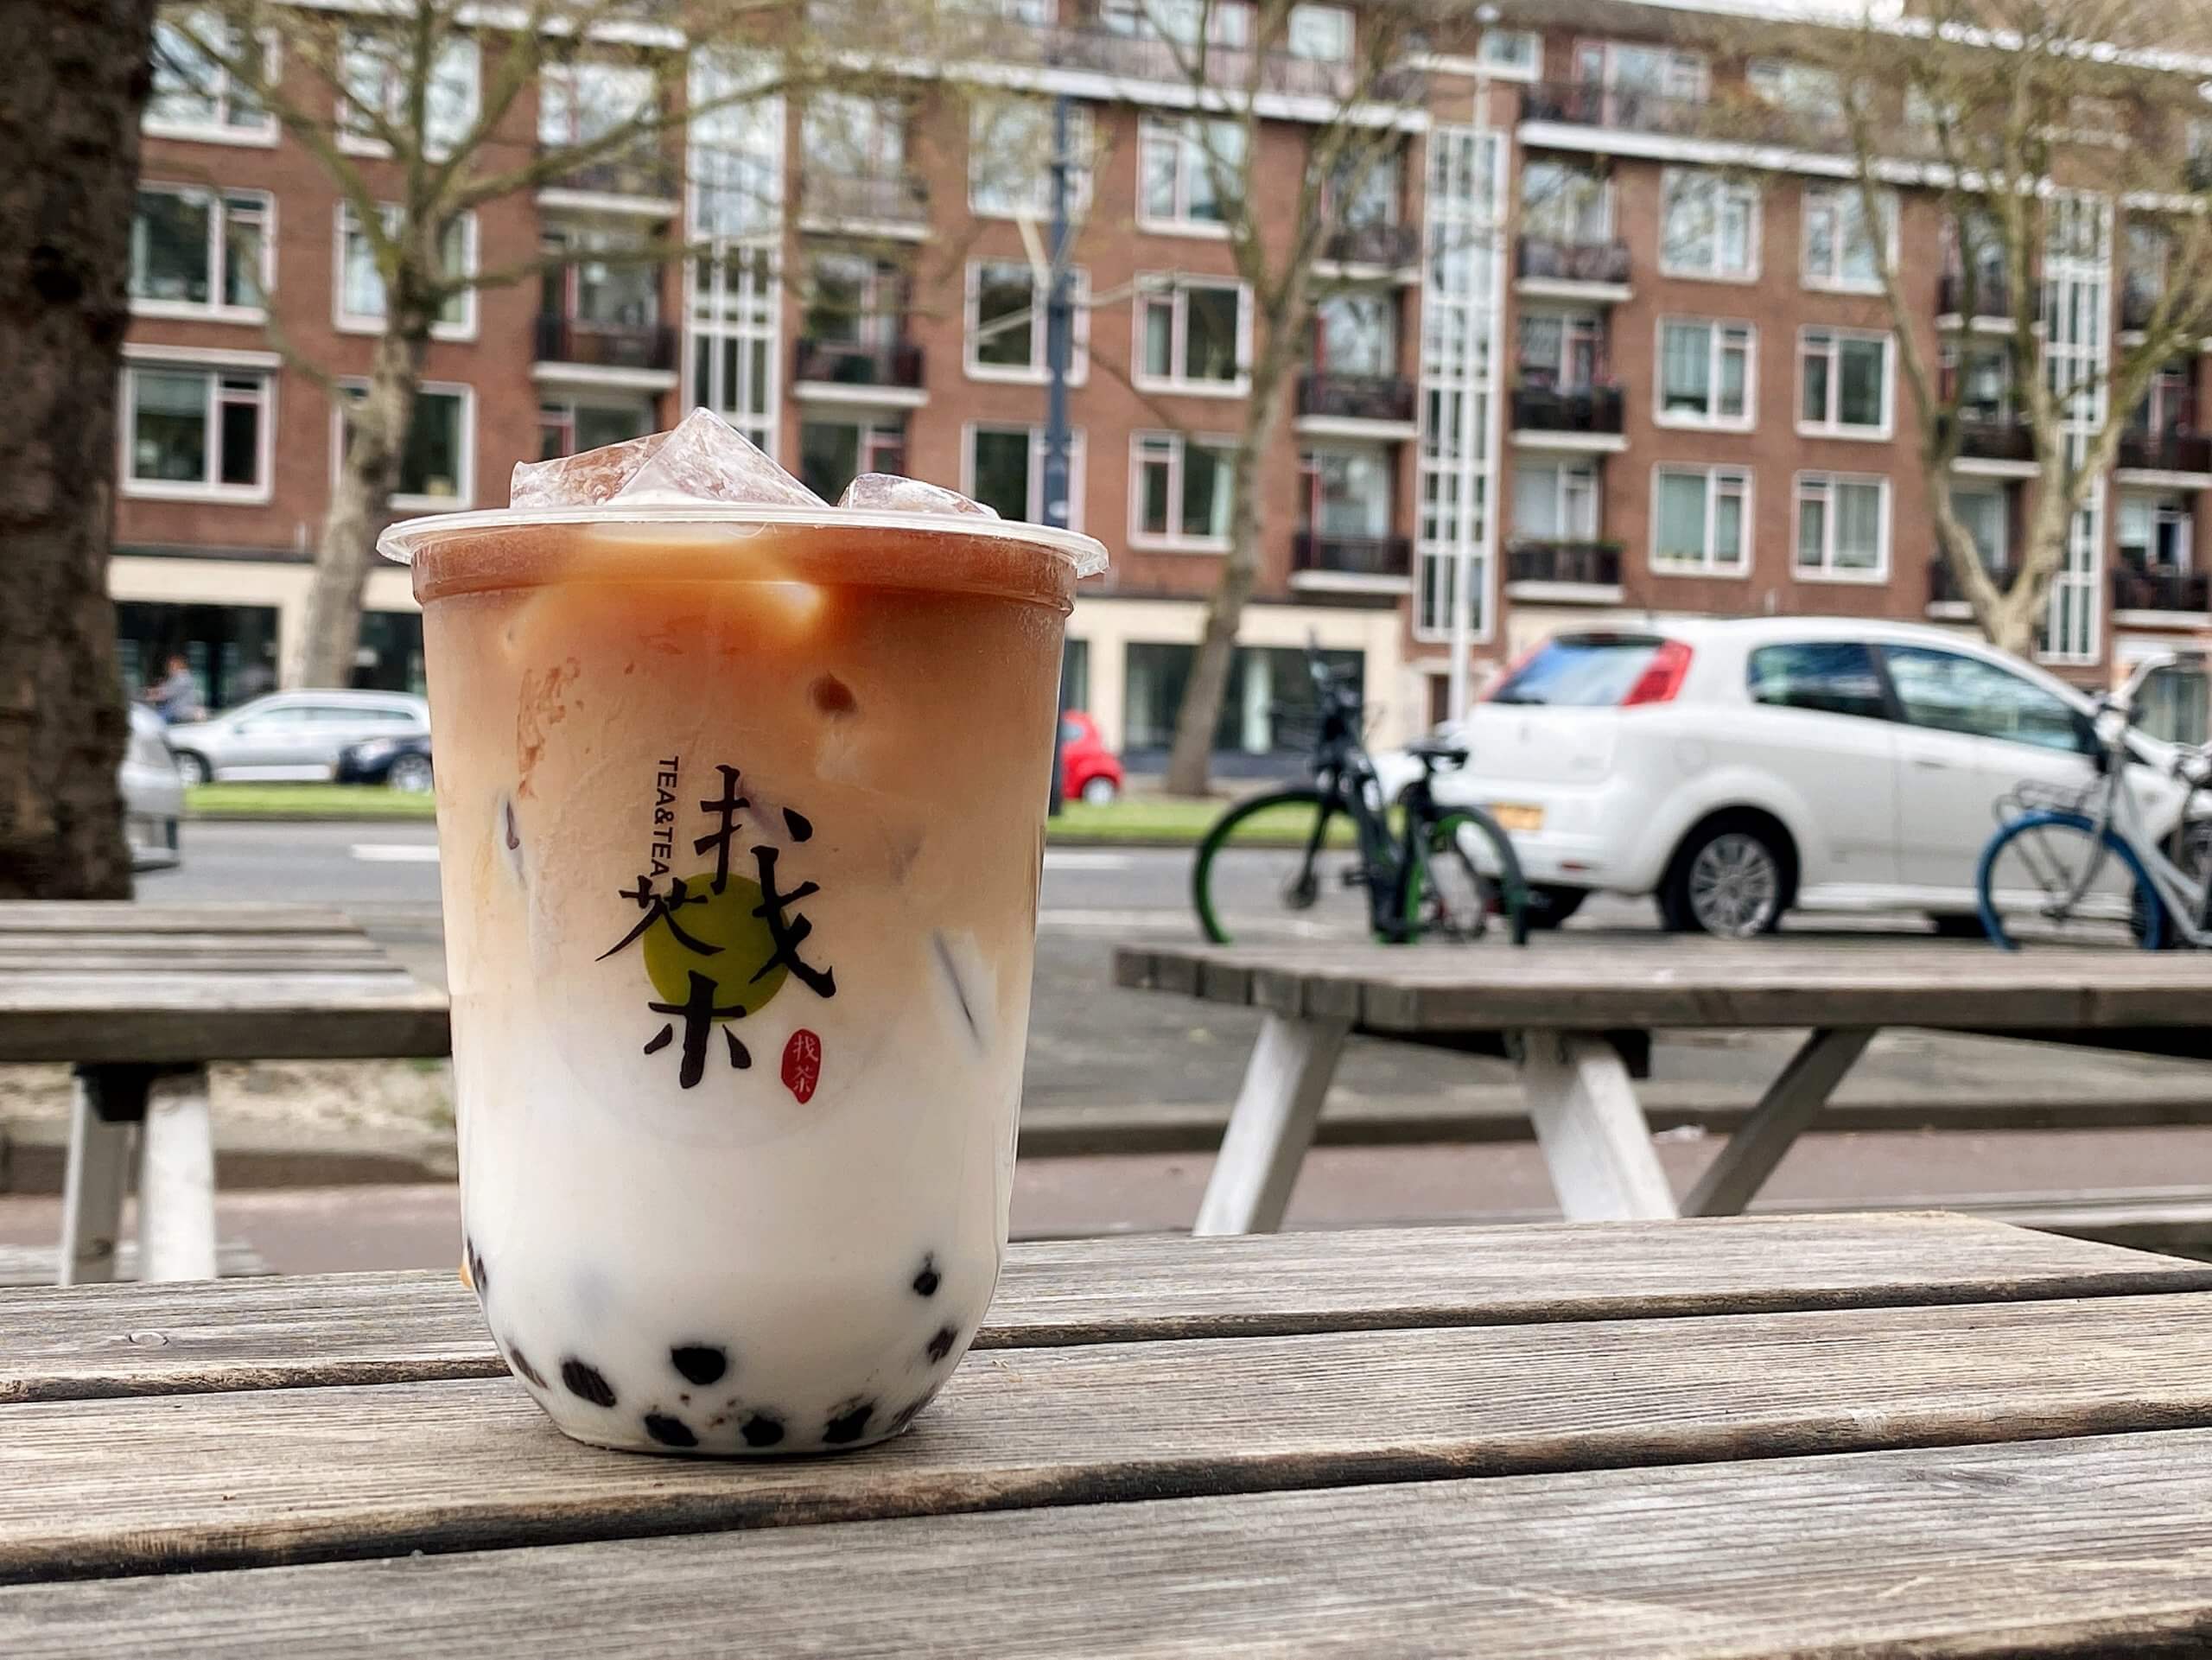 Get your bubble tea fix in Kochi this summer at Smoky Ice